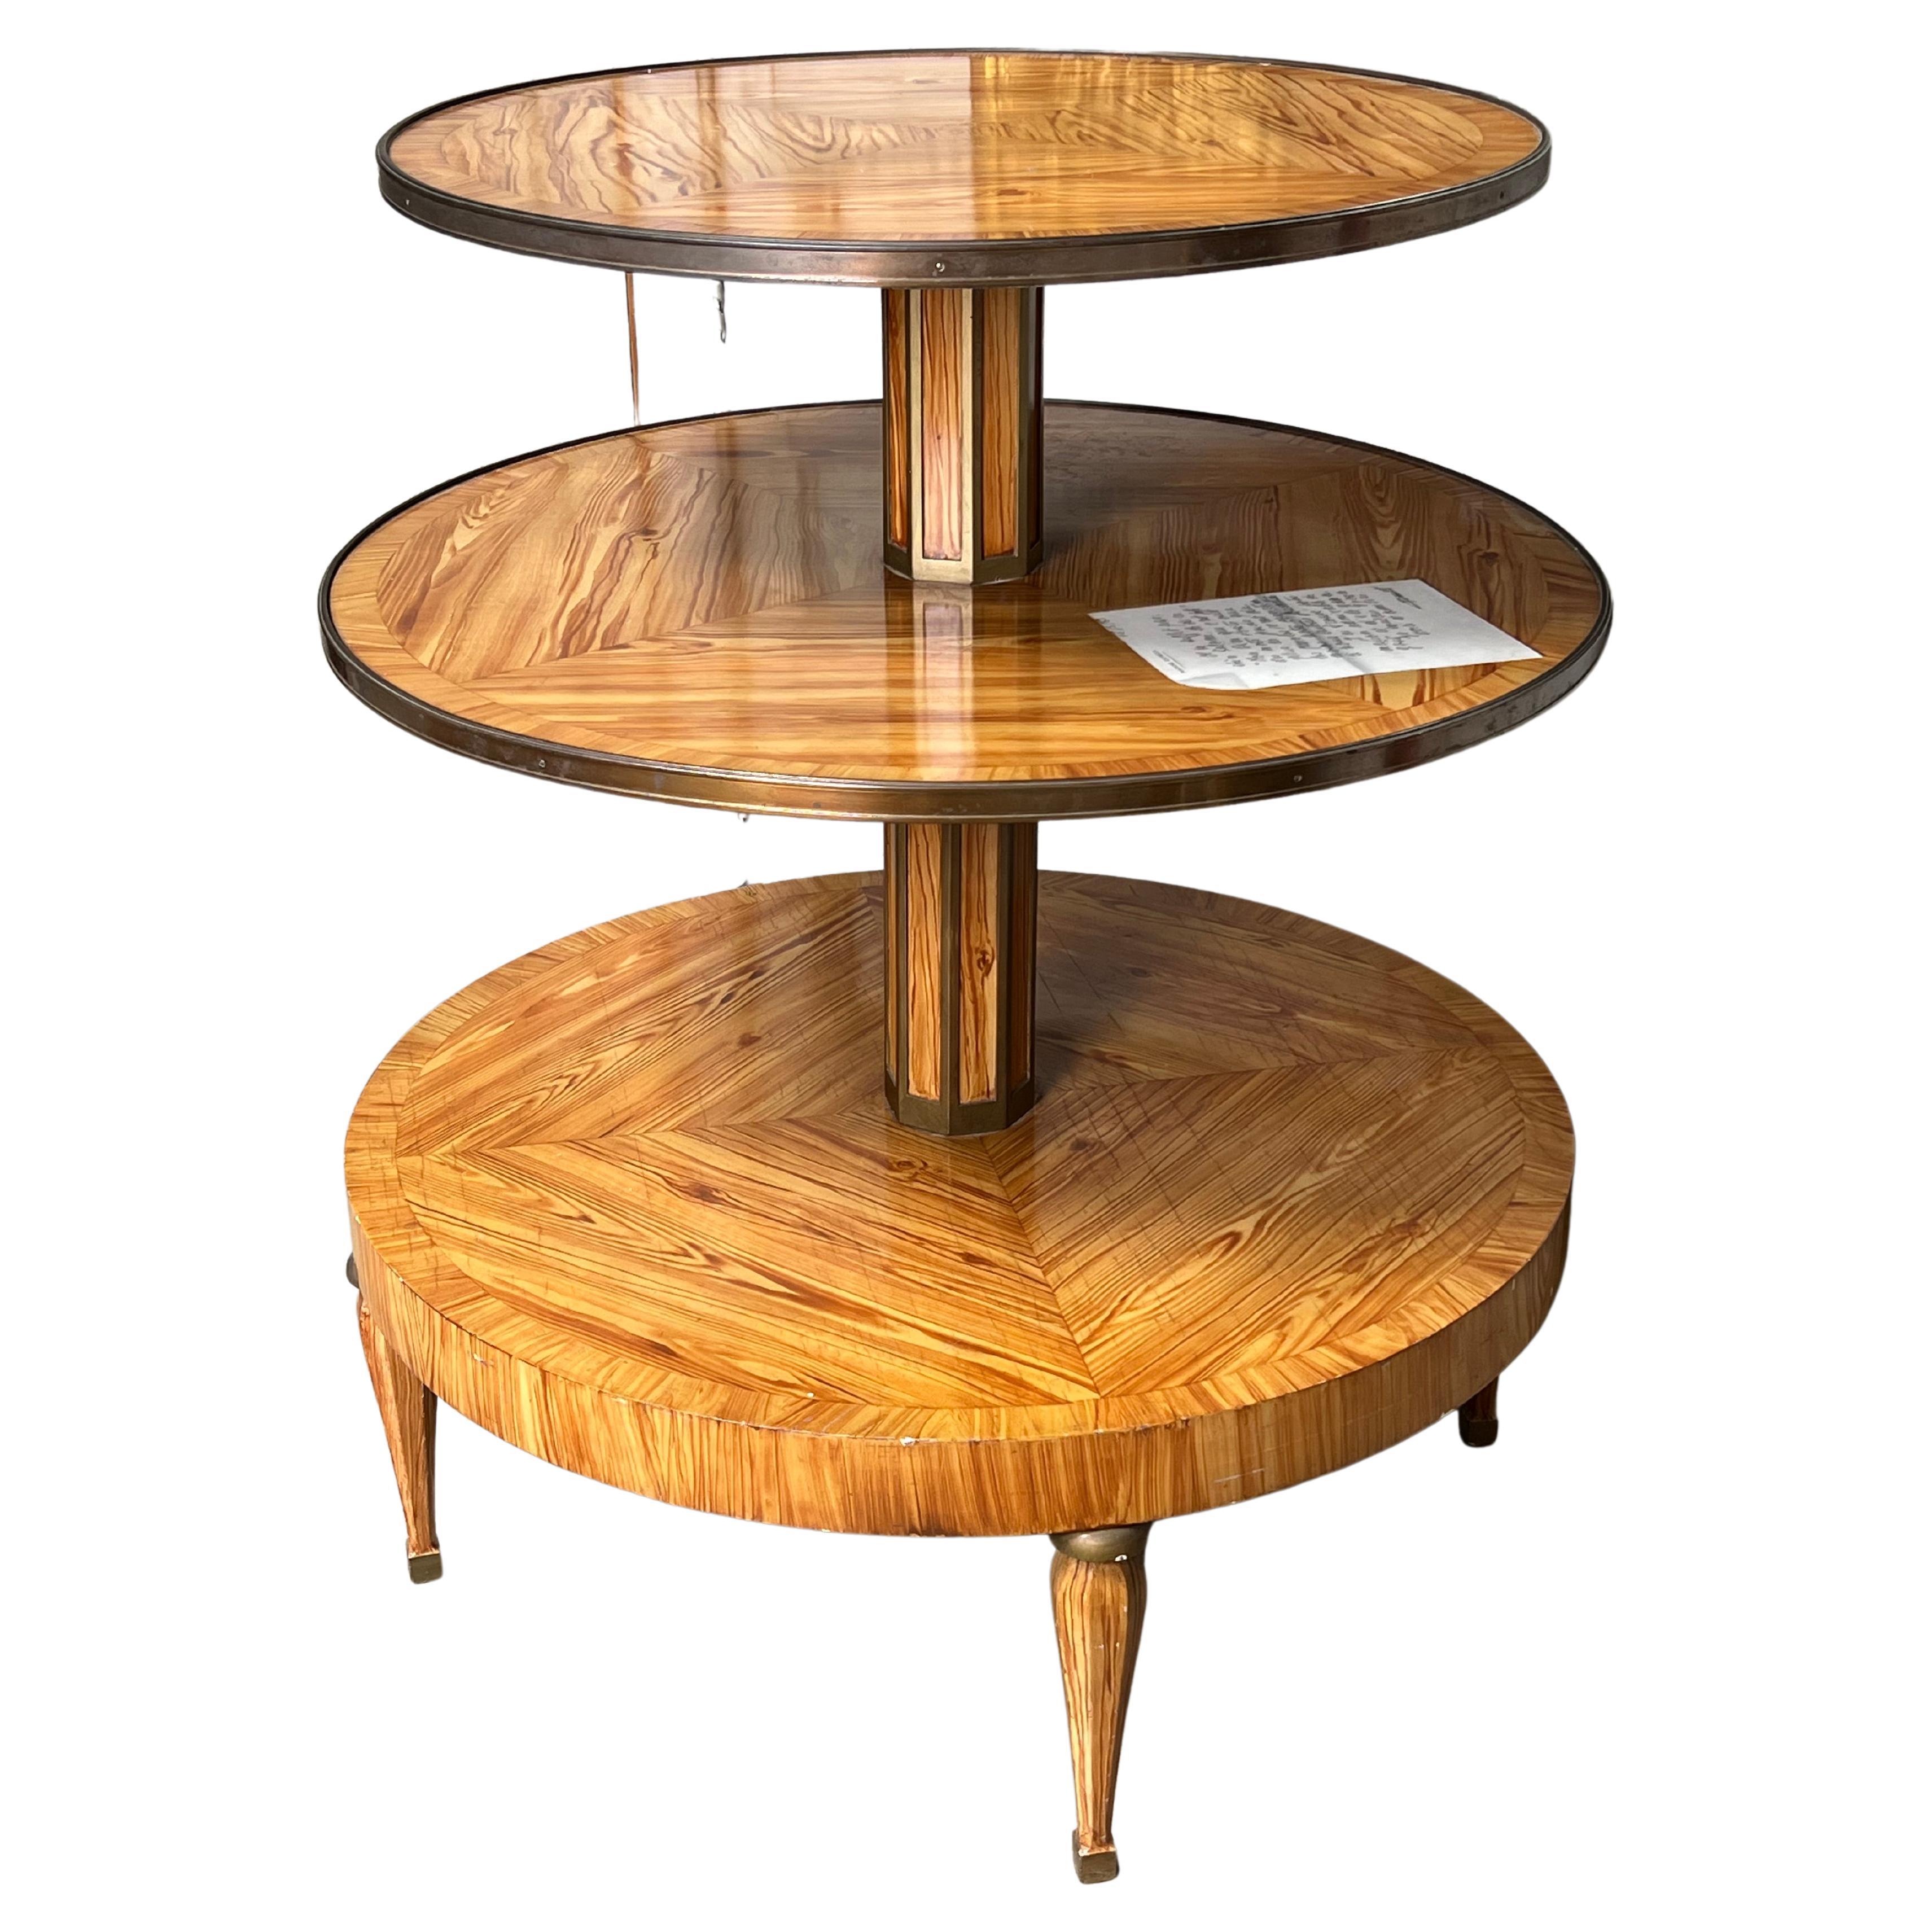 A French revolving dumb waiter, dessert table with a painted wood finish and bronze fittings. An applied letter in French on second shelf stating the quality of the table. this Faux bois three tiered table could also serve as an etagere for